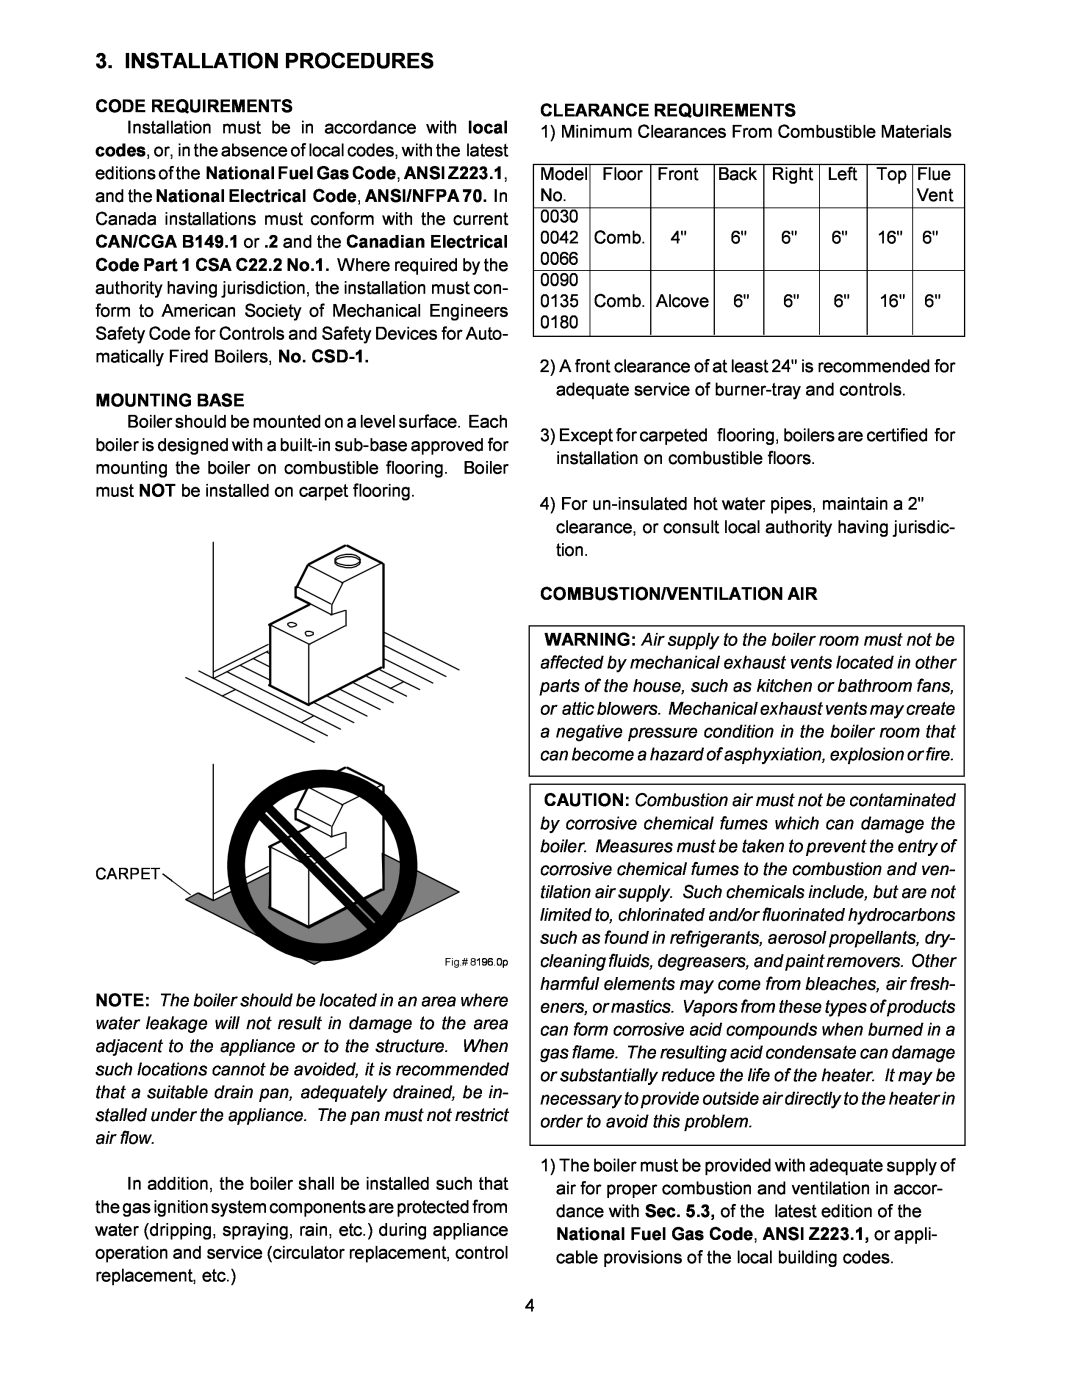 Raypak 0090B 0135B Installation Procedures, Code Requirements, Mounting Base, Clearance Requirements 